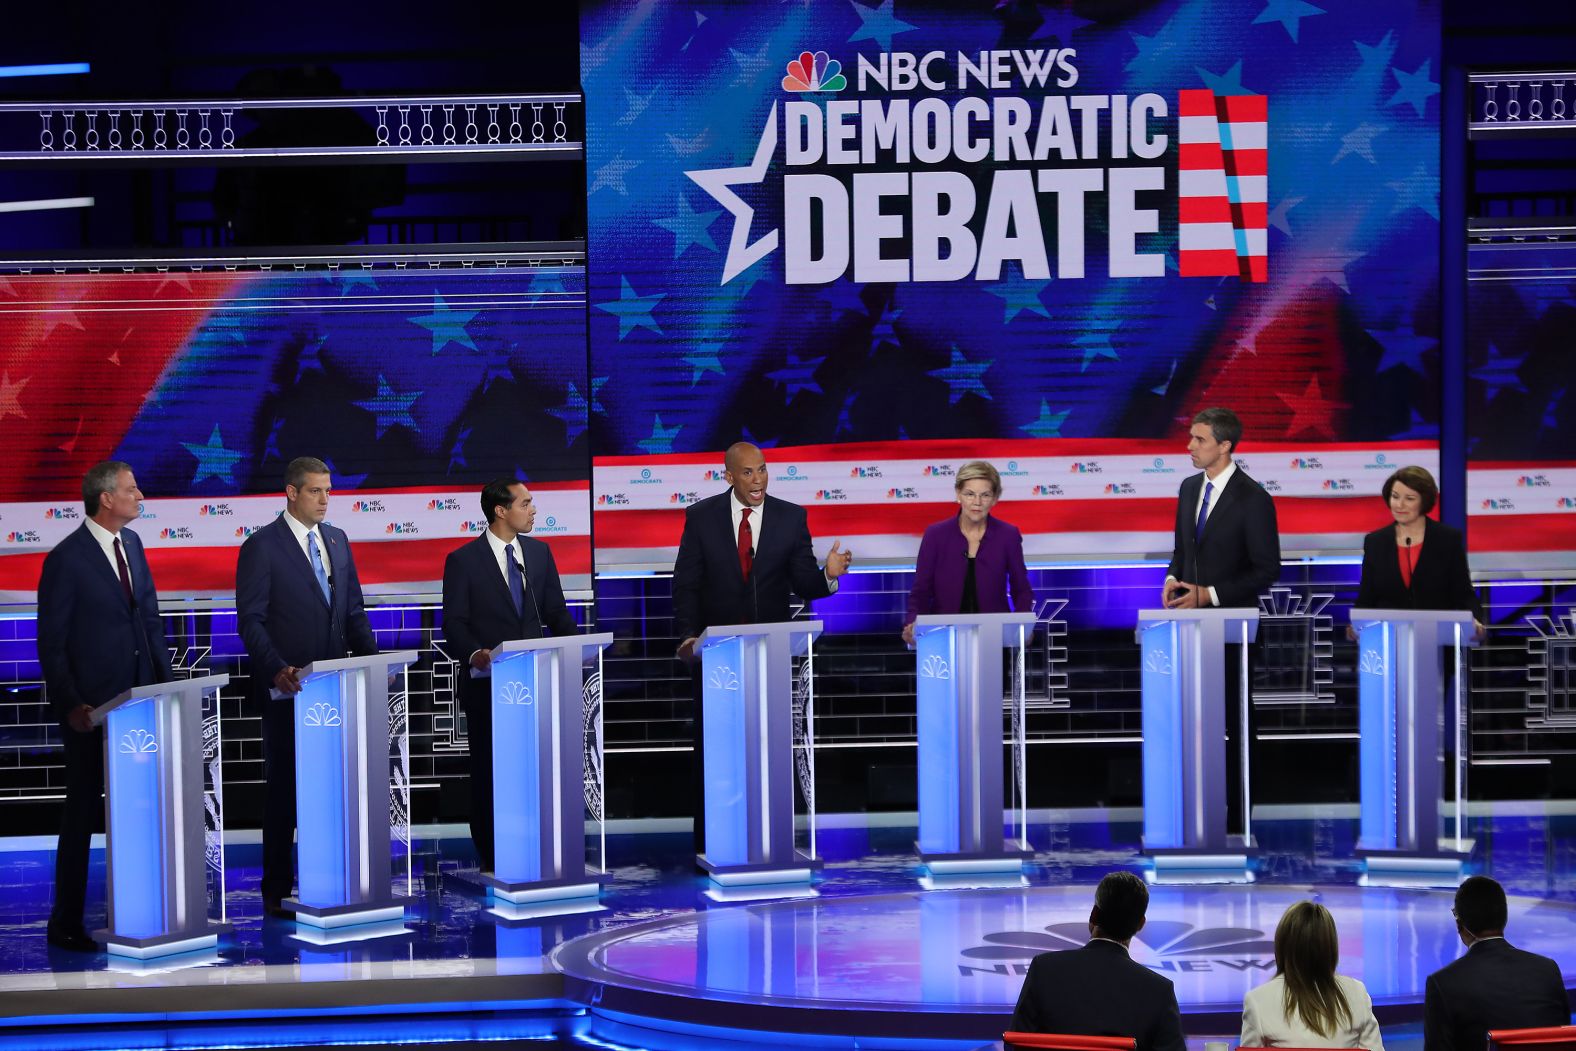 None of the candidates <a href="index.php?page=&url=https%3A%2F%2Fwww.cnn.com%2Fpolitics%2Flive-news%2Fdemocratic-debate-june-26-2019%2Fh_163ce5a8d87984a3da47ad1591709788" target="_blank">is polling above 35% nationally.</a> Four years ago, Hillary Clinton was polling at around 60%.